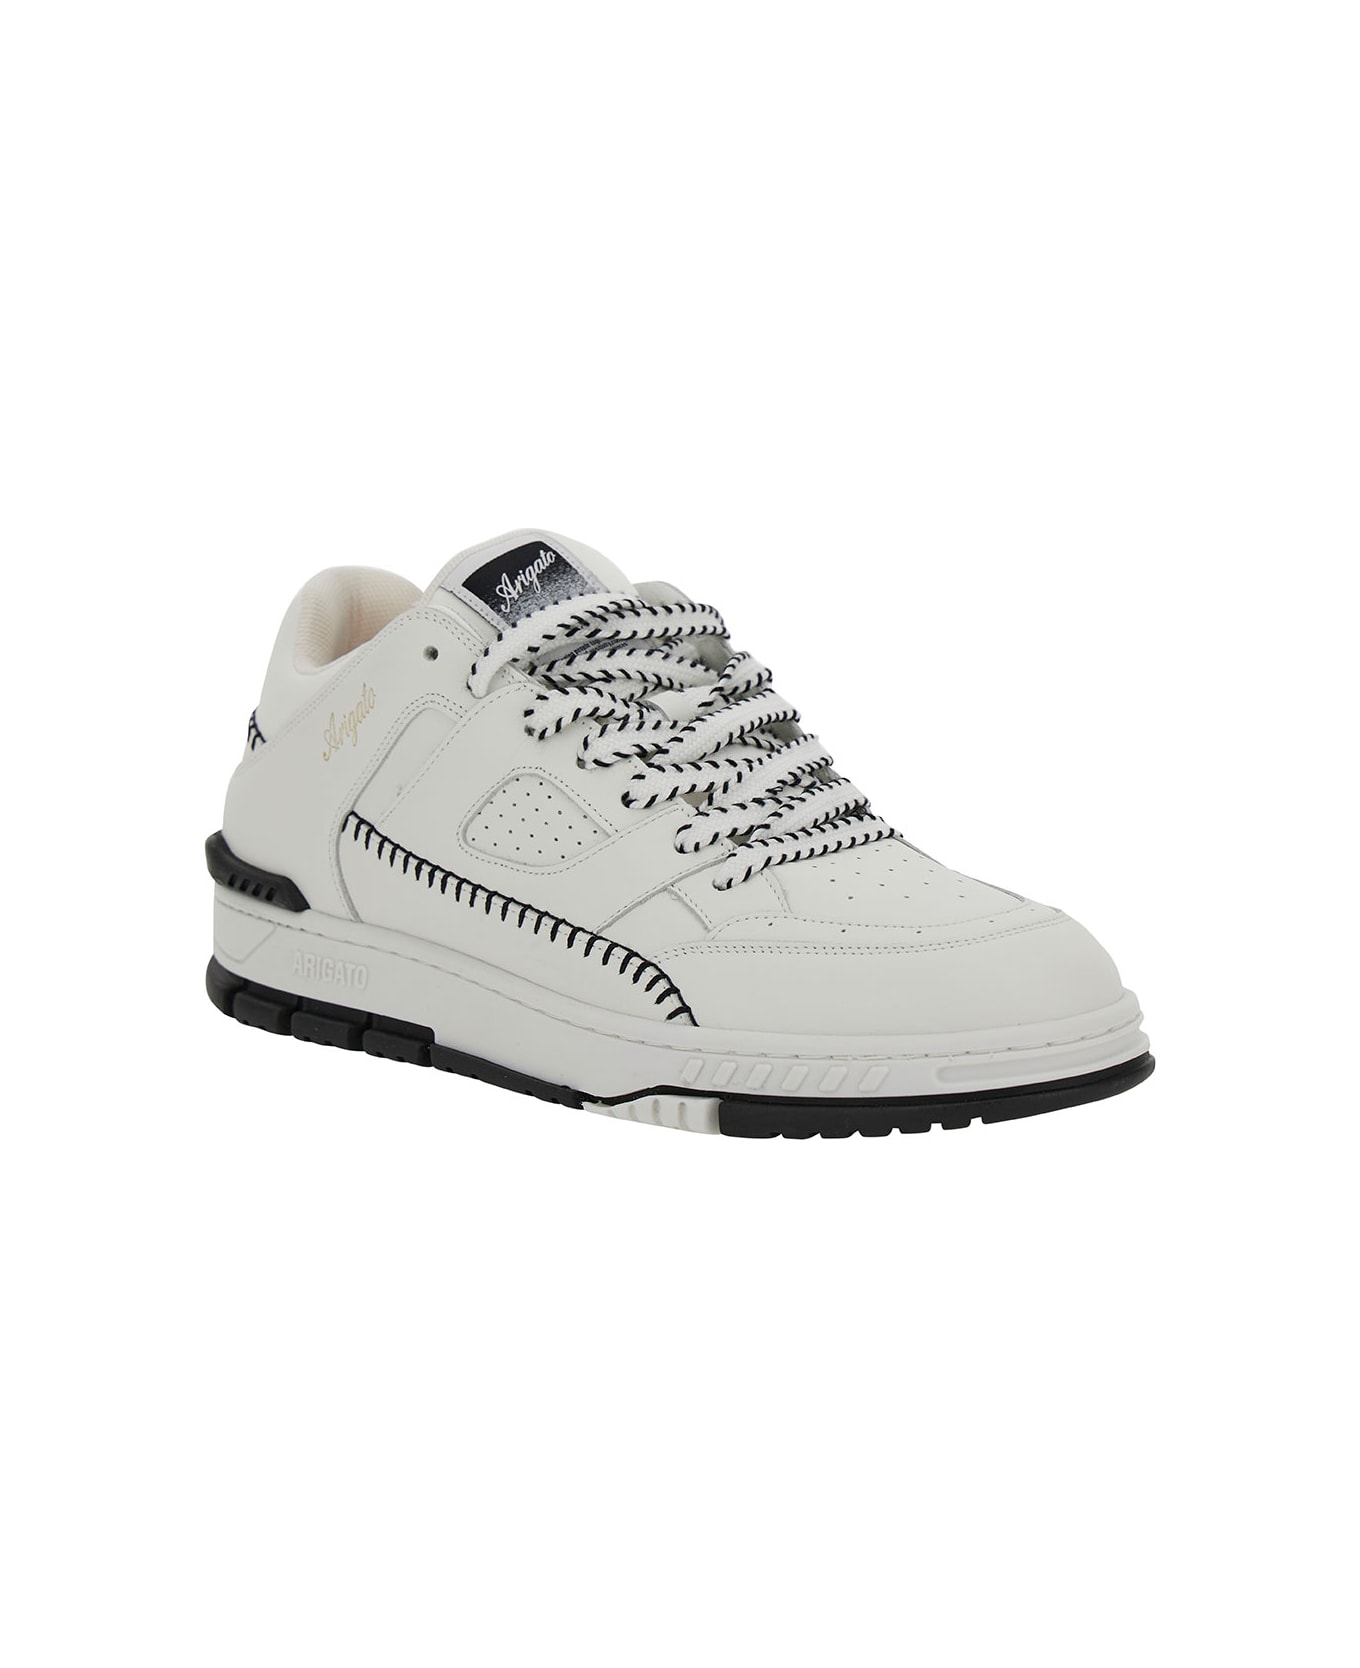 Axel Arigato 'area Lo Sneaker Stitch' White Low Top Sneakers With Contrasting Stitch Detail In Leather Man - White